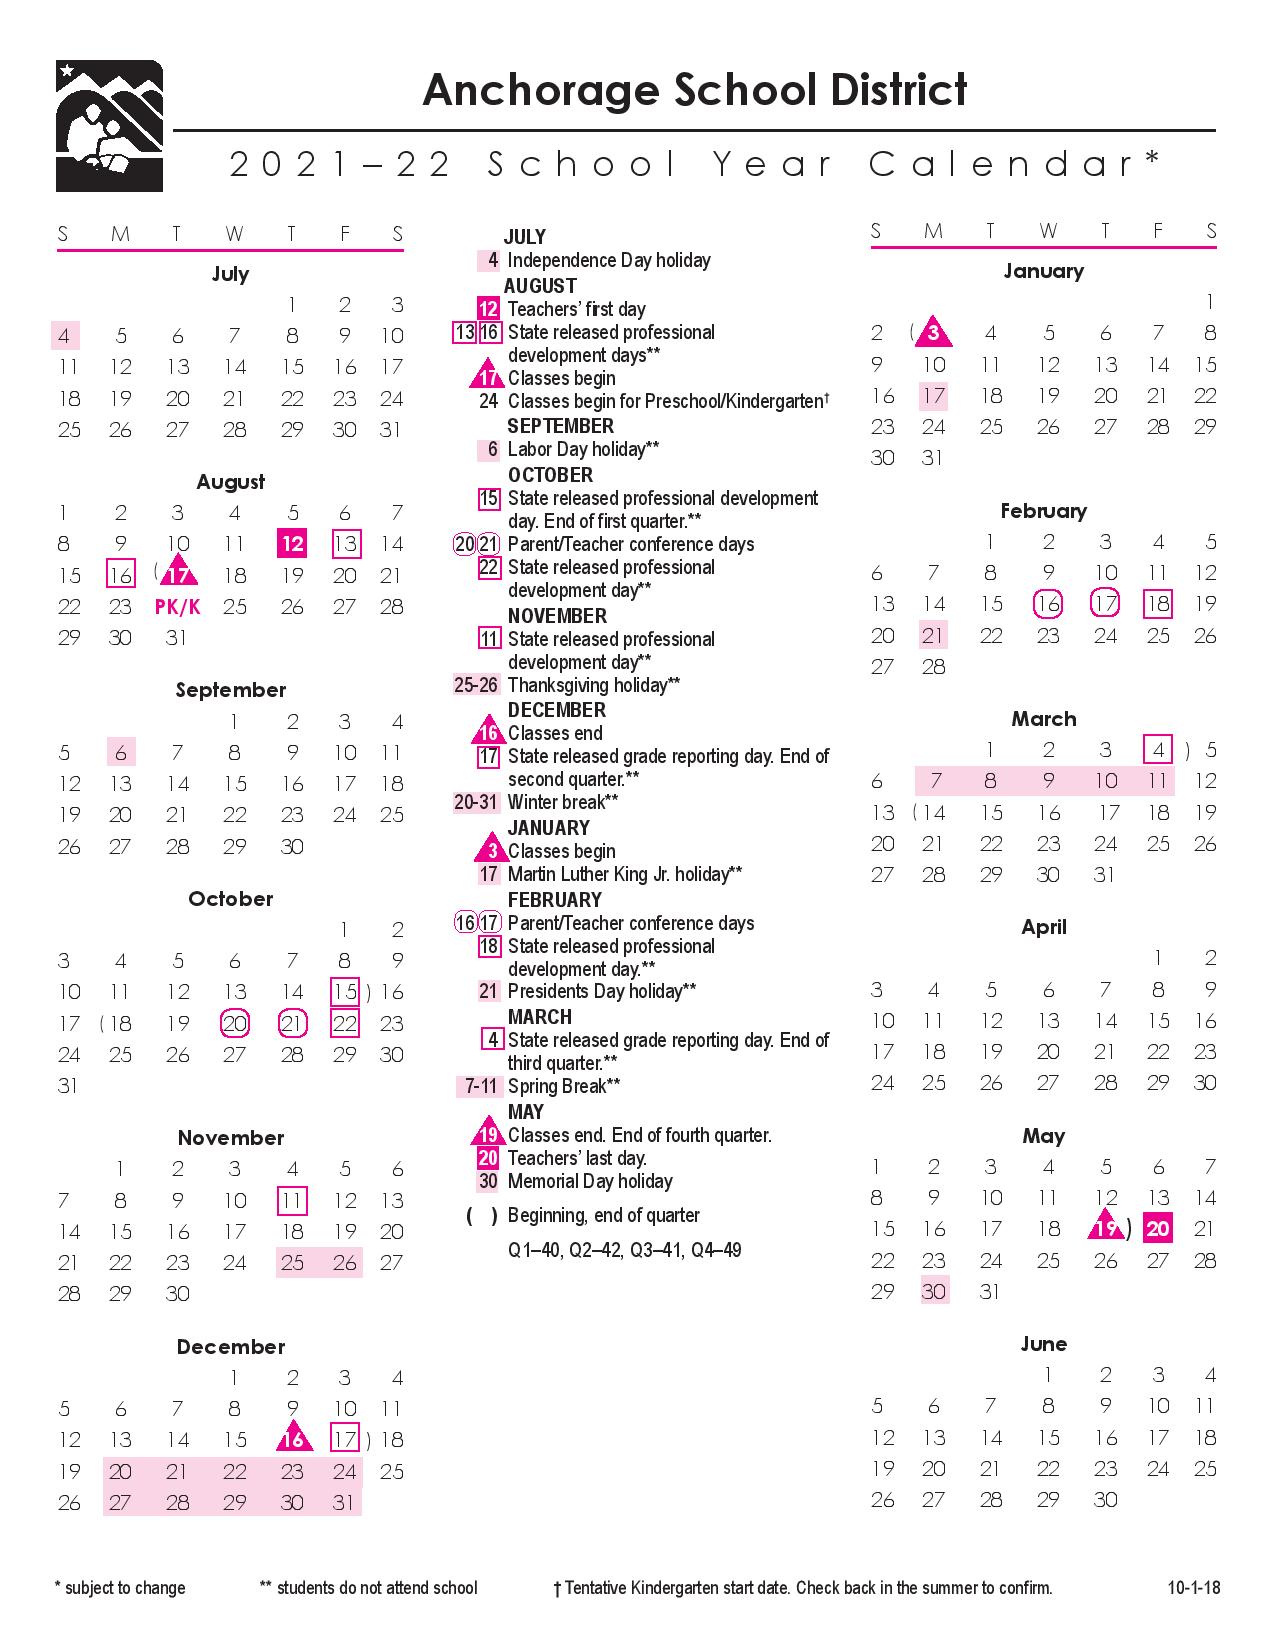 Anchorage School District Calendar 2021 and 2022